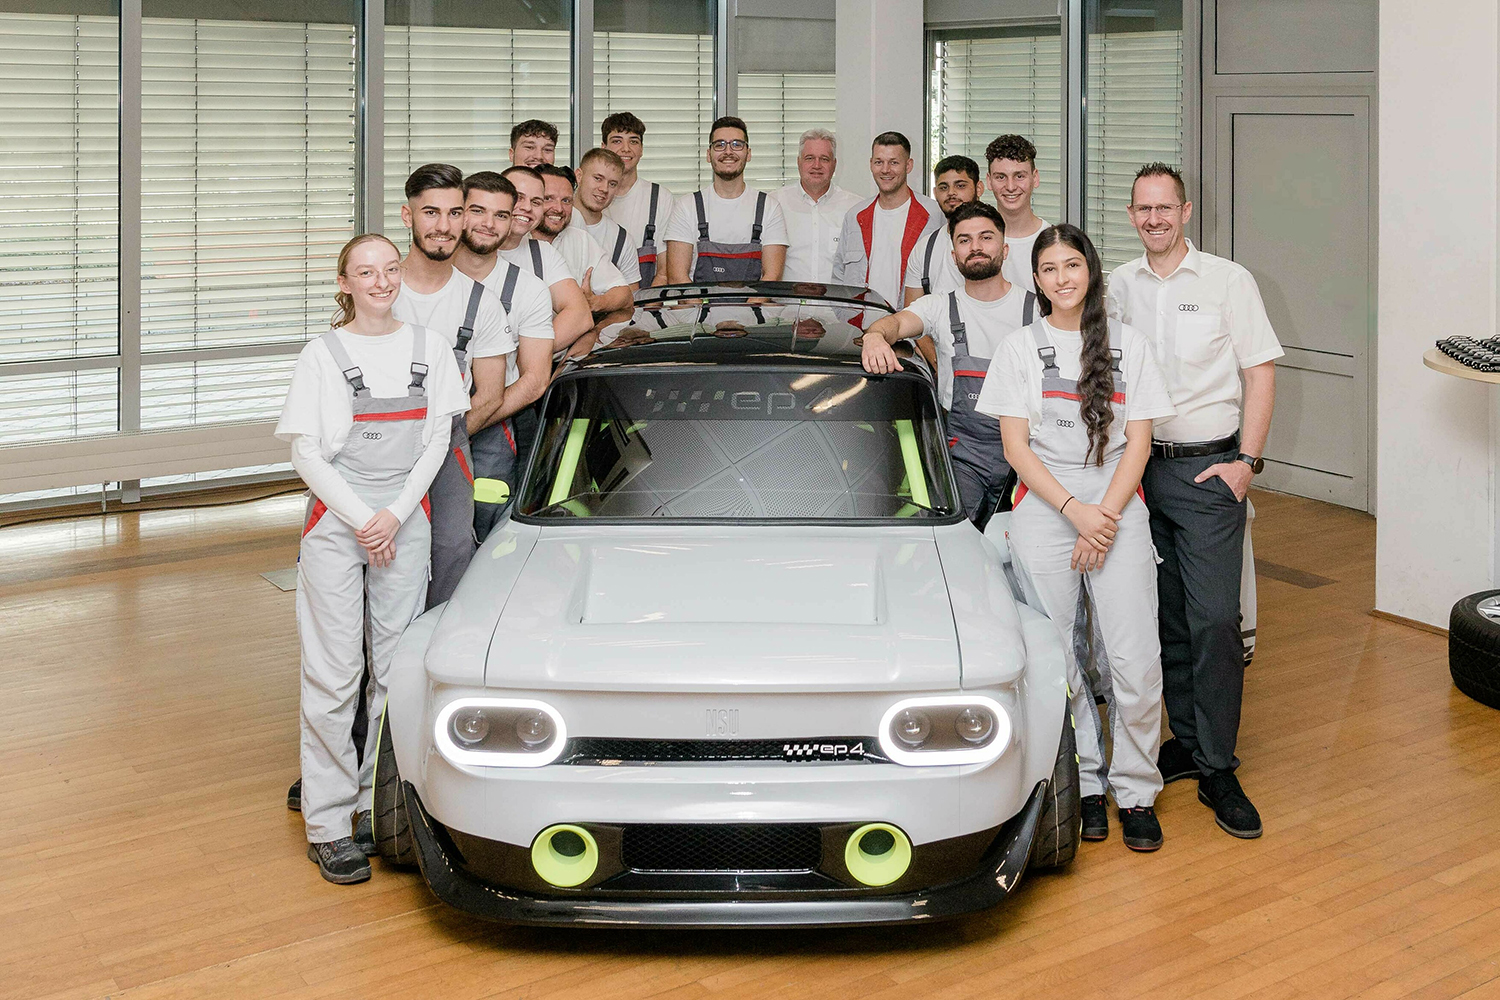 To mark the 150th anniversary of the NSU brand, apprentices from Audi Neckarsulm unveil an NSU Prinz they have converted into an electric car.